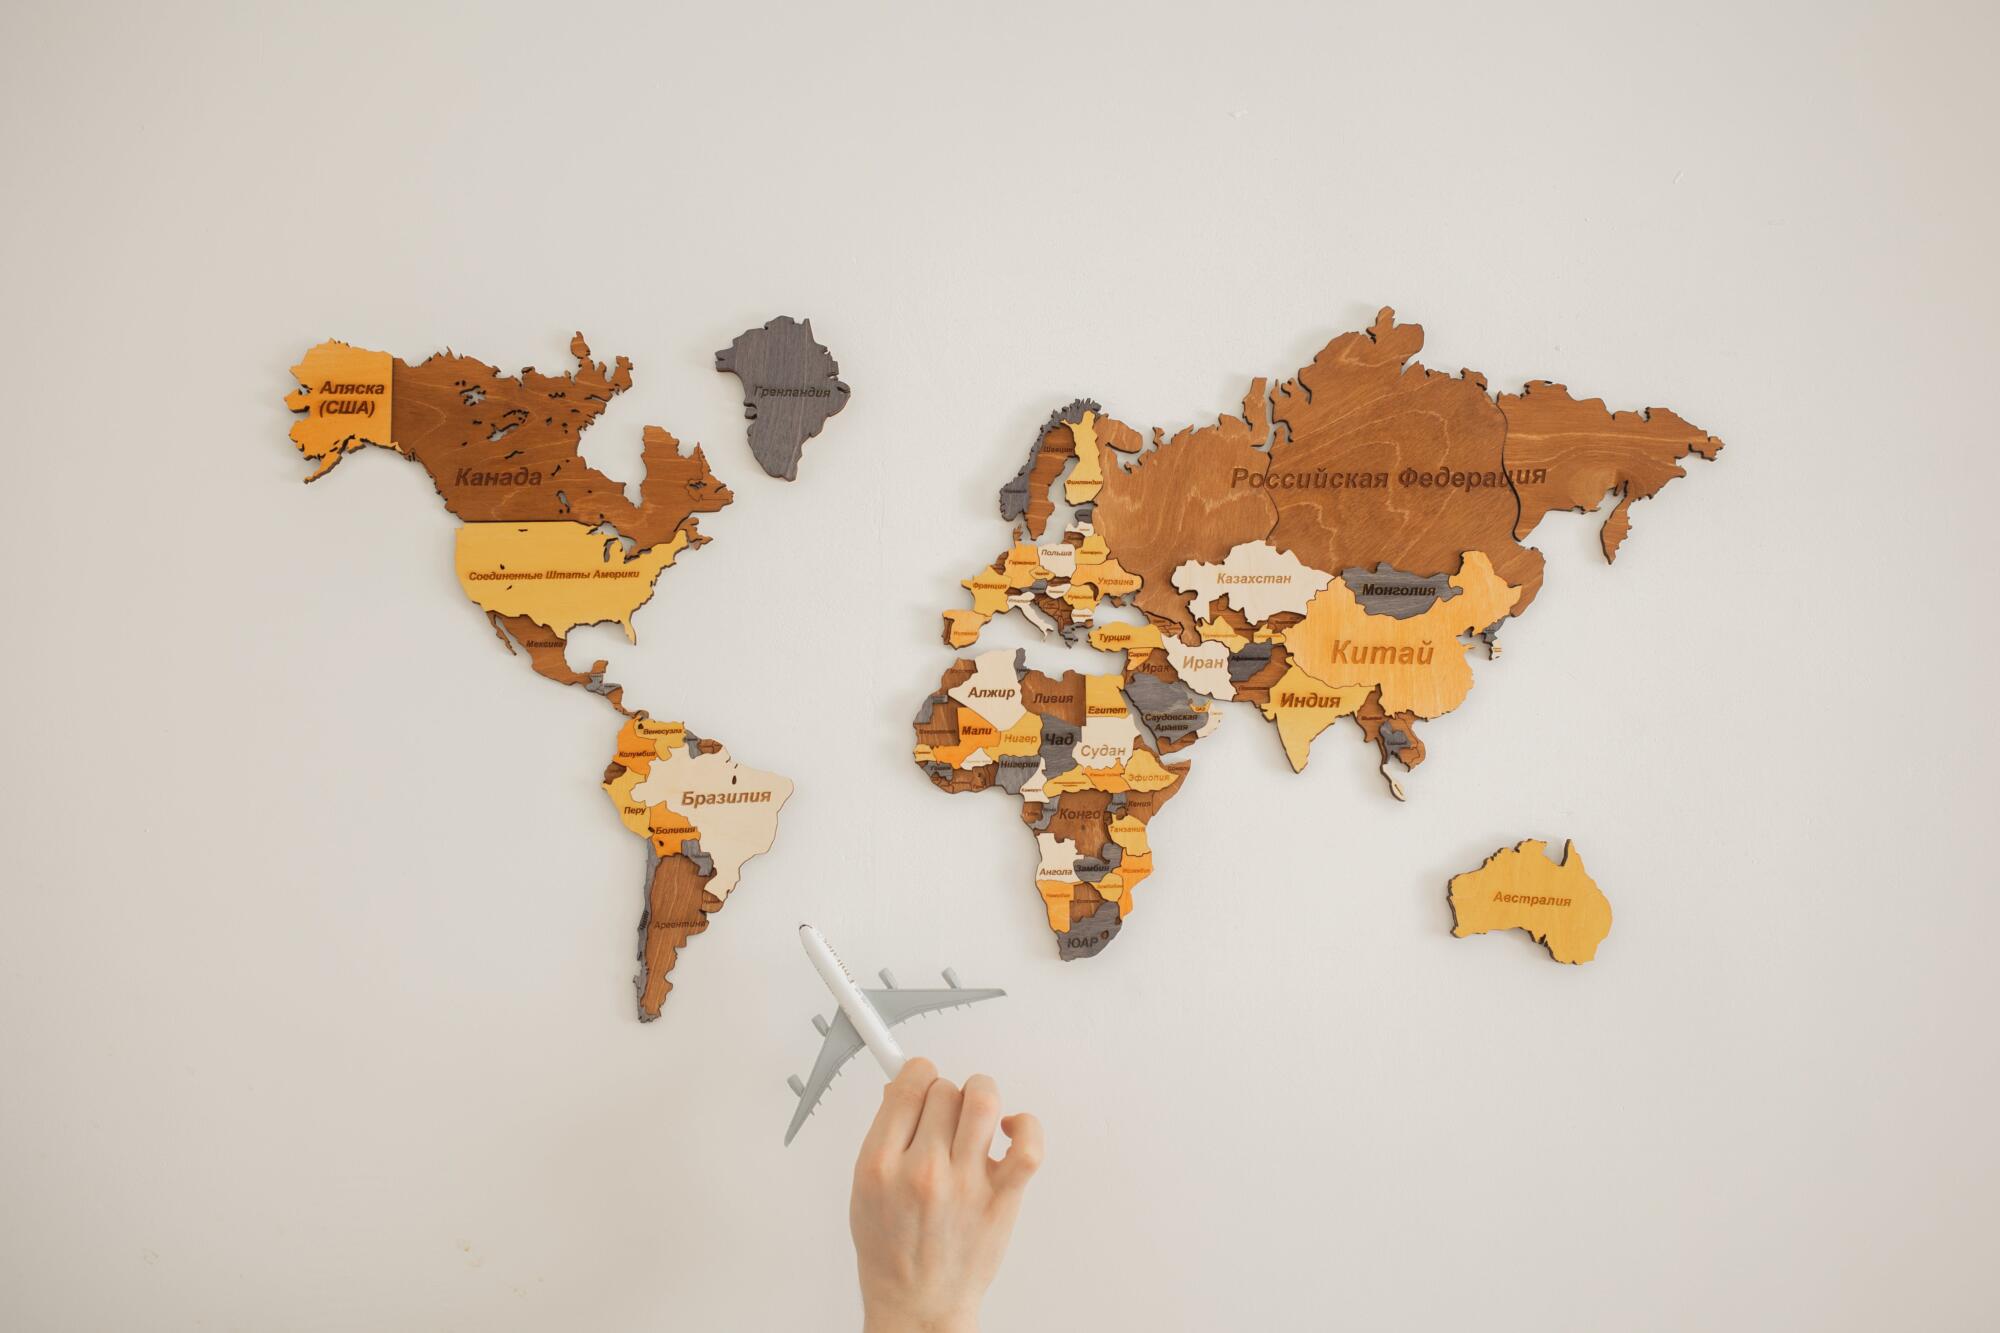 A person is holding a wooden world map, showcasing cultural fusion, in front of a white wall.